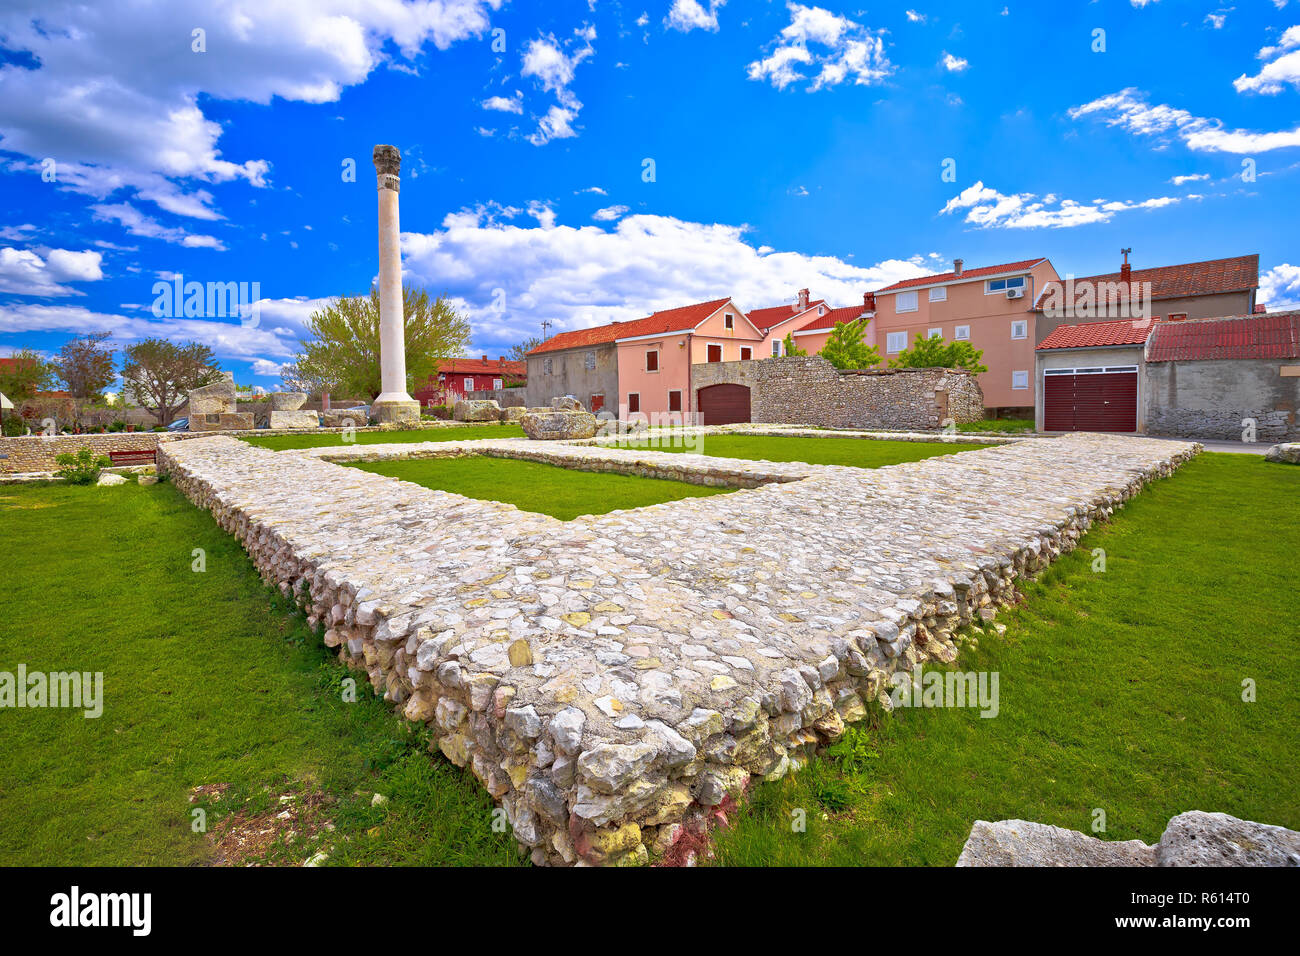 Old roman ruins and colorful architecture in town of Nin Stock Photo